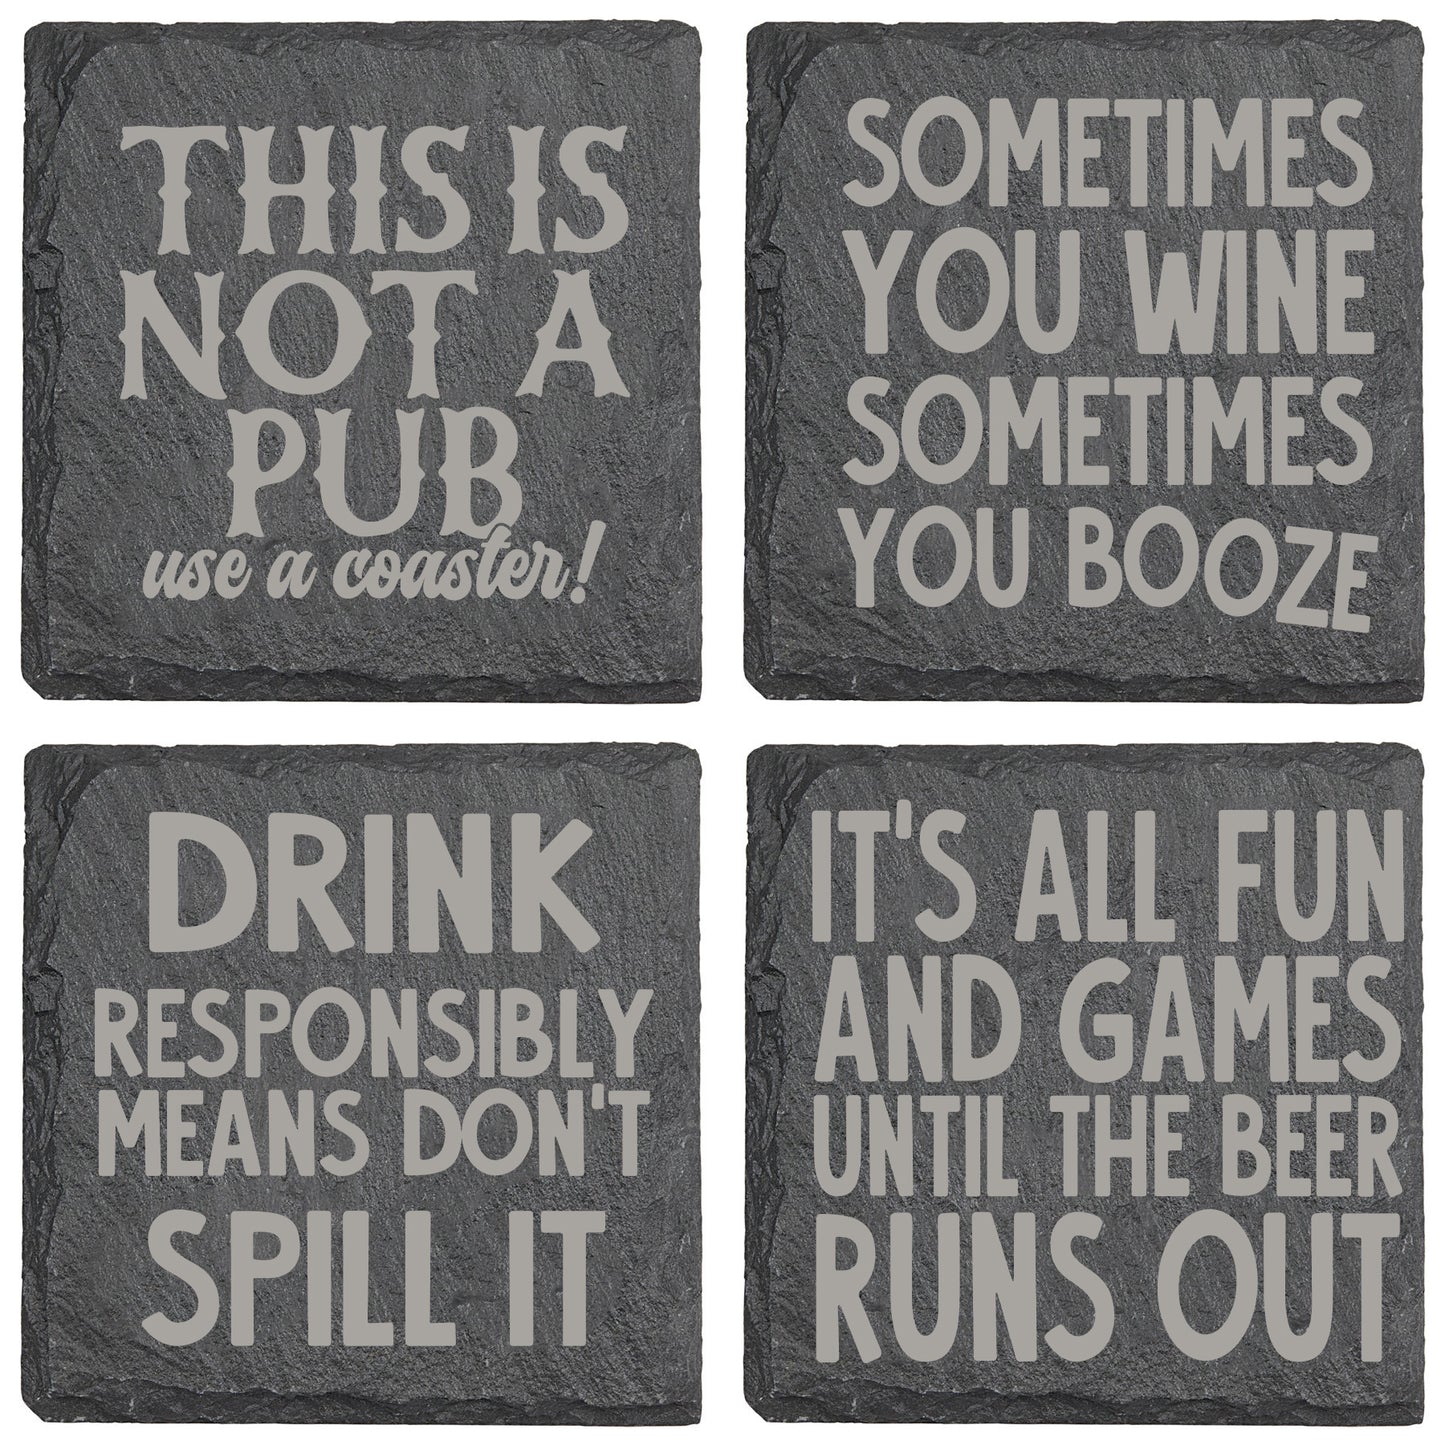 This is Not a Pub Slate Coaster